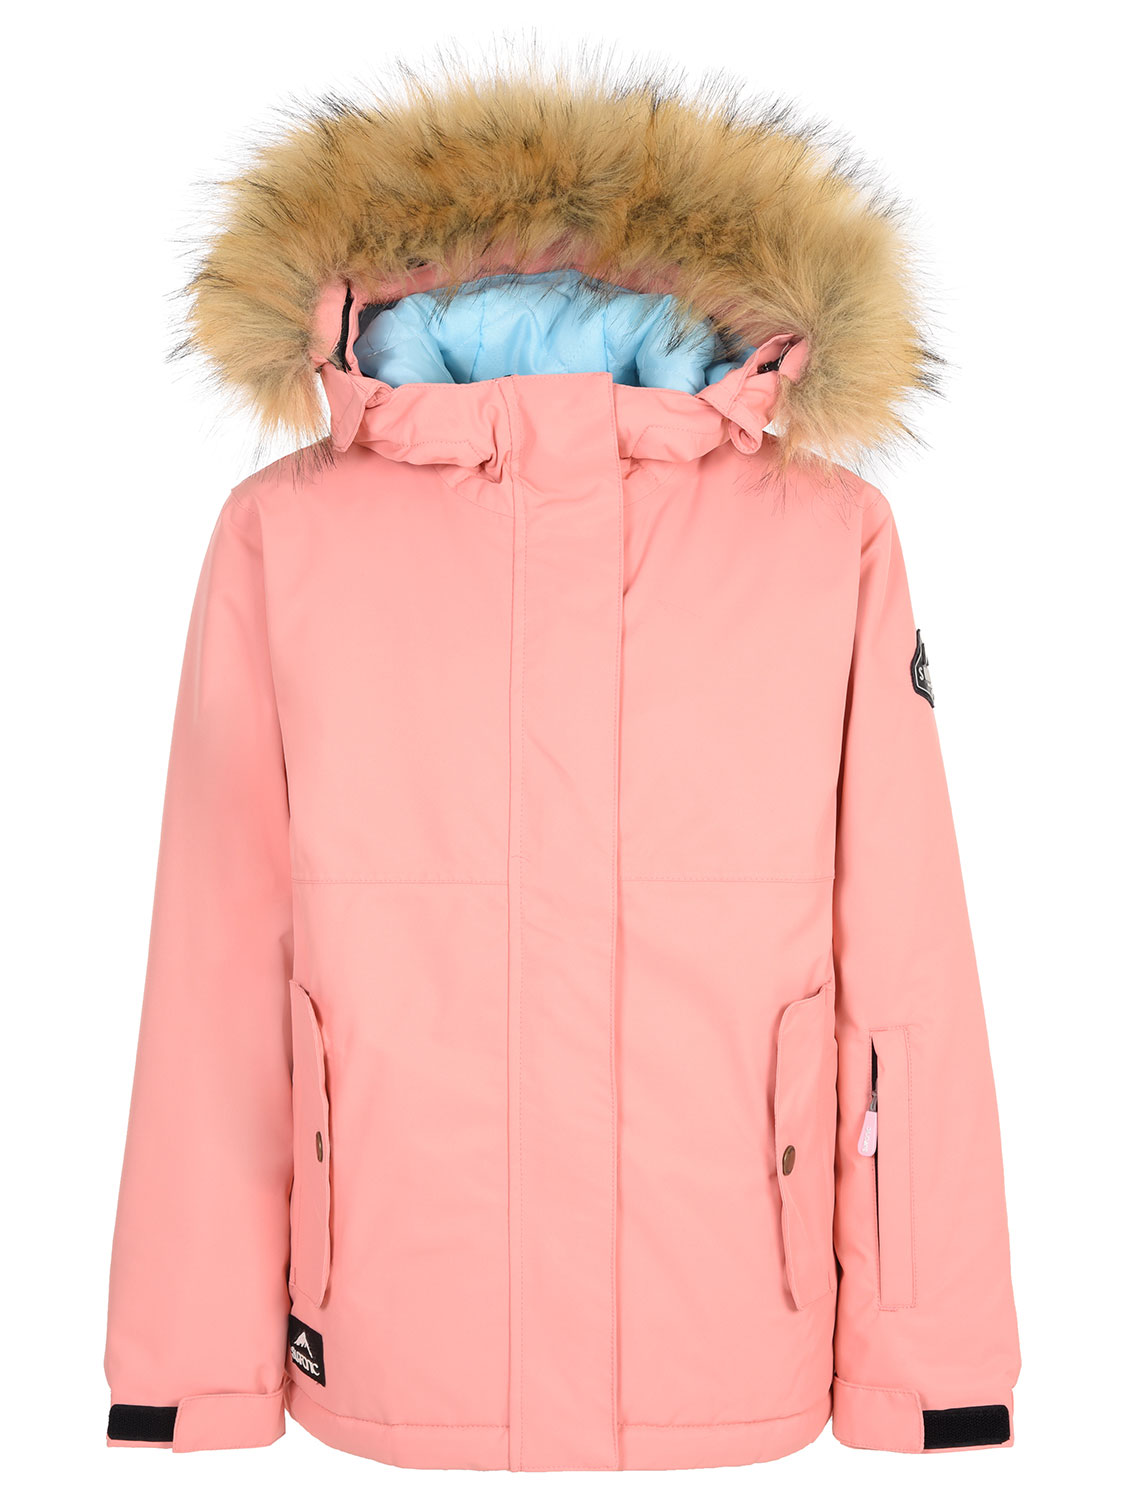 NEW Surfanic Dove Lightweight Down Jacket Down Jacket Dusty Pink Pink